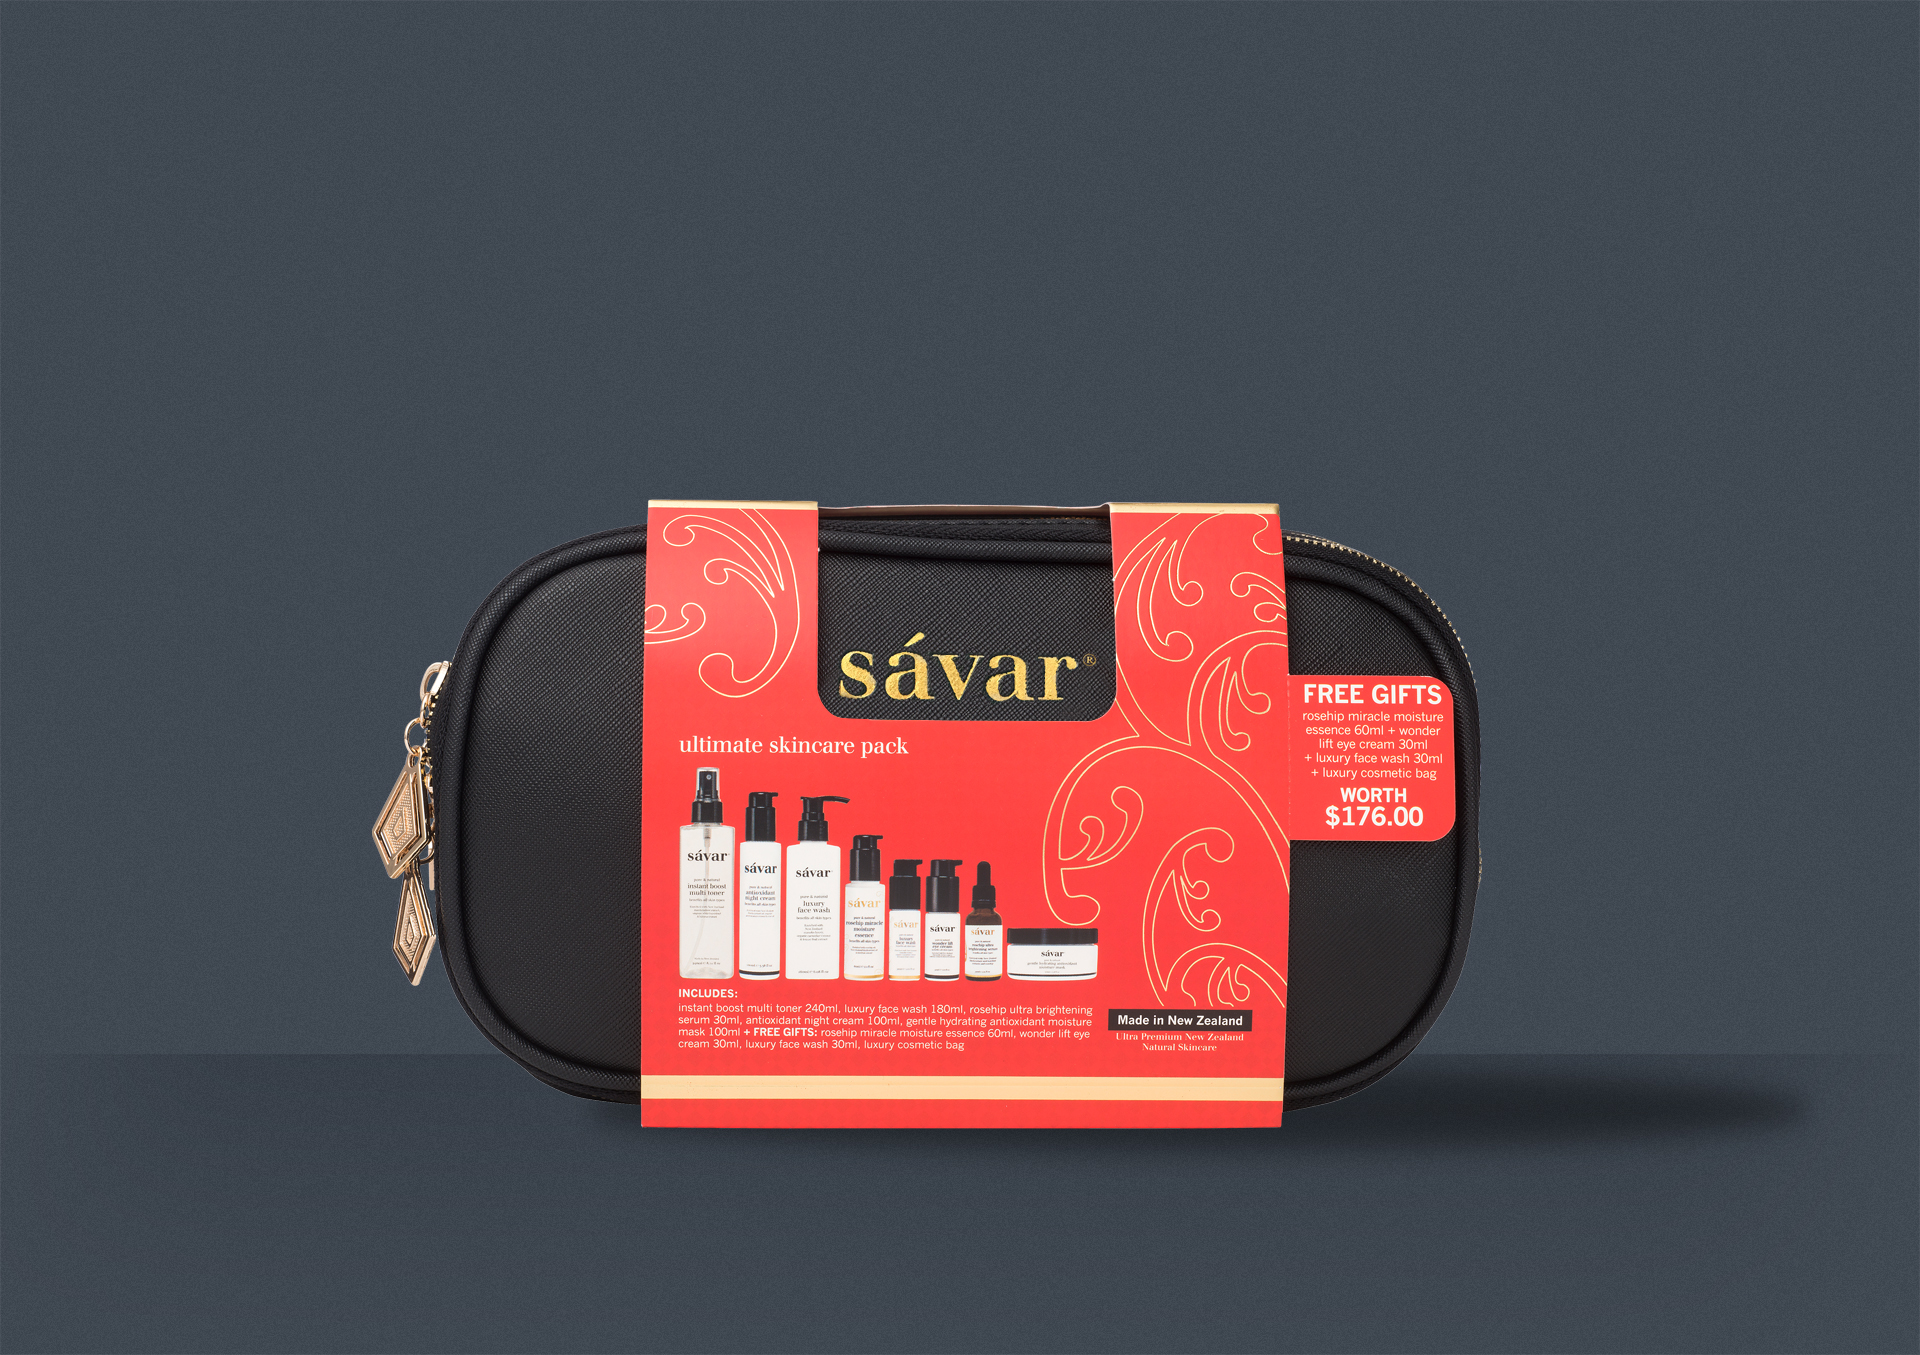 Savar_skincare_pack_gift_bag_free_gifts_packaging_design_branding_design_product_page_Graphic_design_agency_redfire